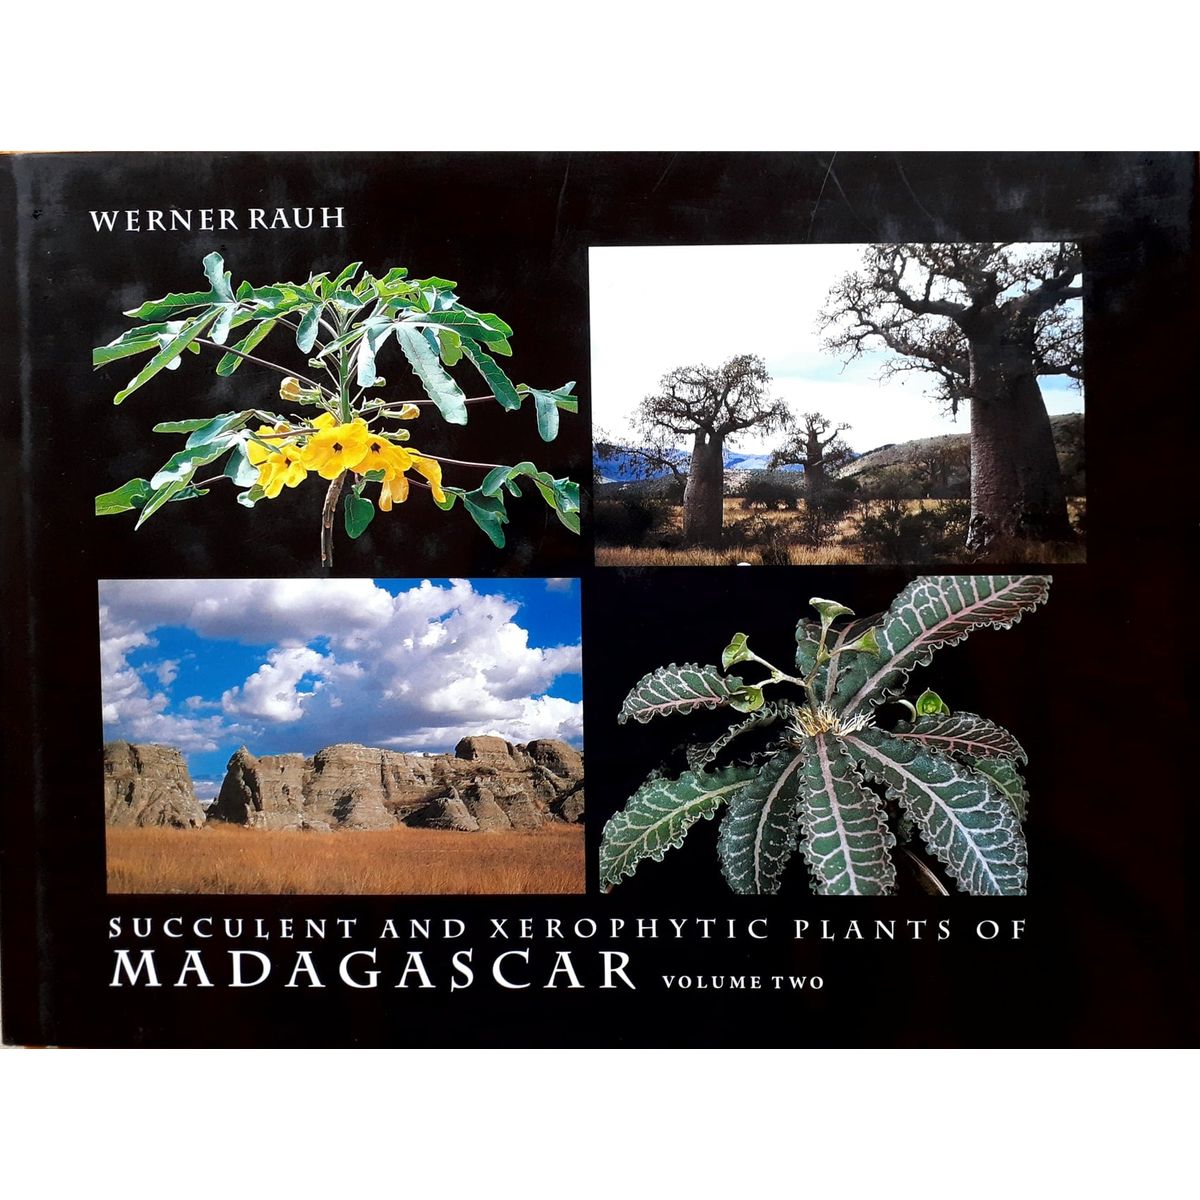 ISBN: 9780912647173 / 0912647170 - Succulent and Xerophytic Plants of Madagascar: Volume Two by Werner Rauh [1998]